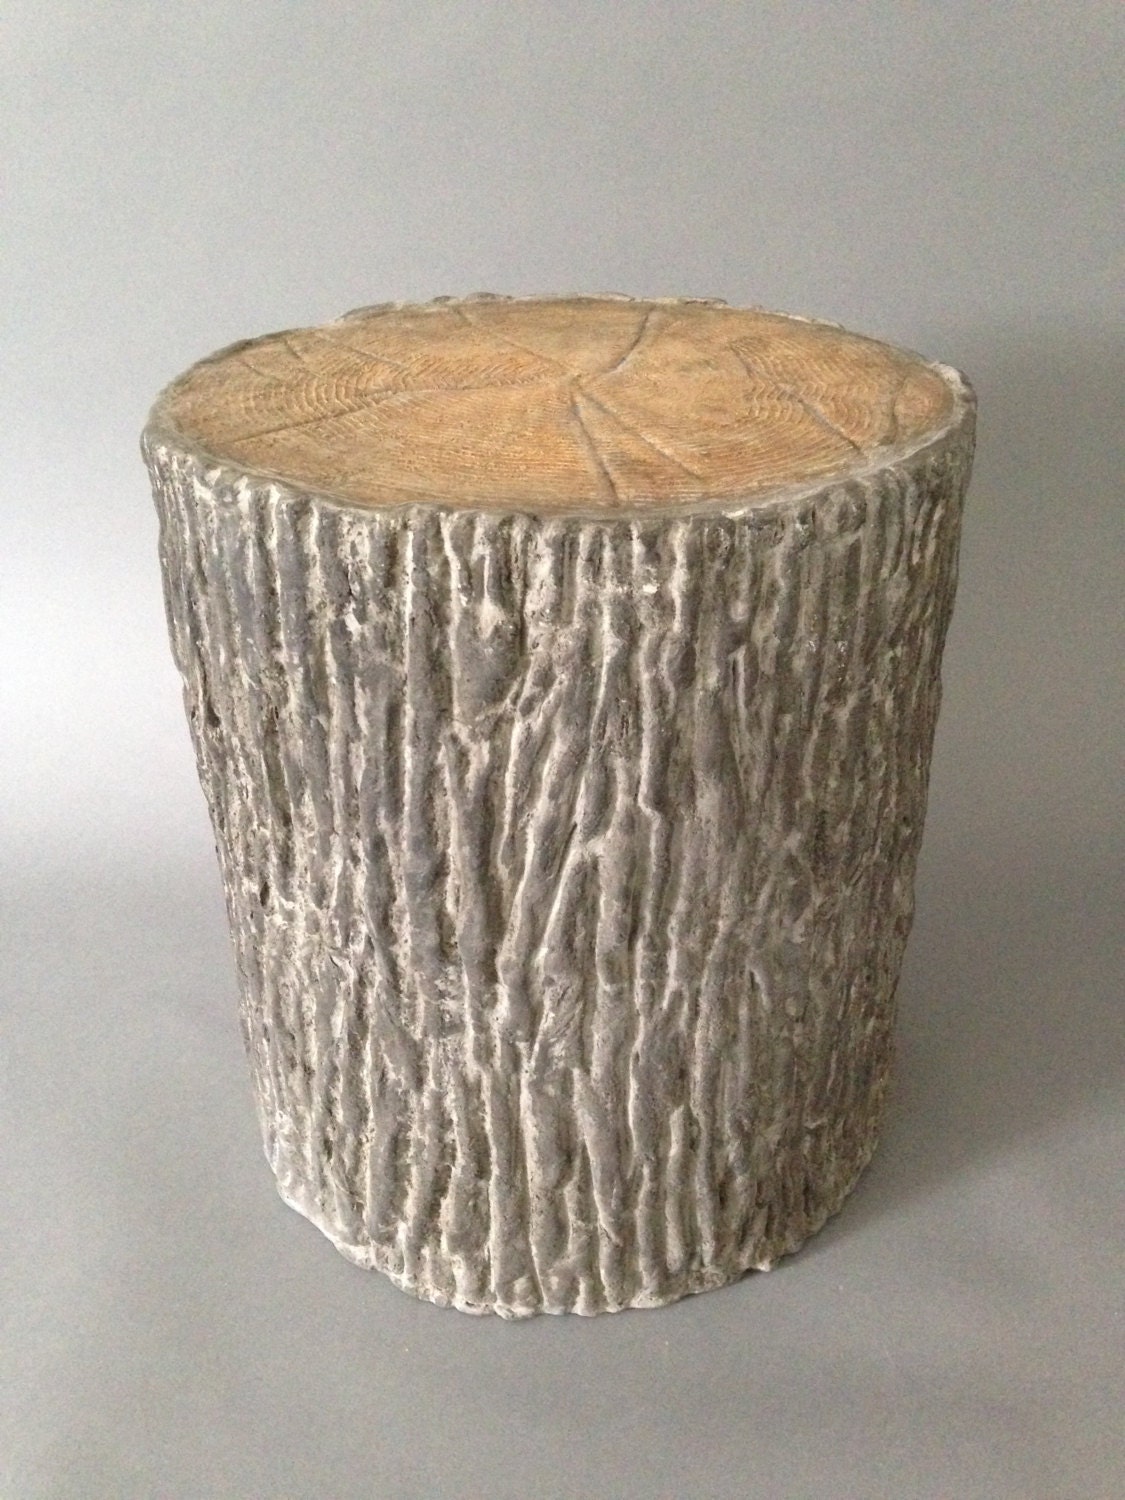 Faux Bois Garden Stool by 910castings on Etsy